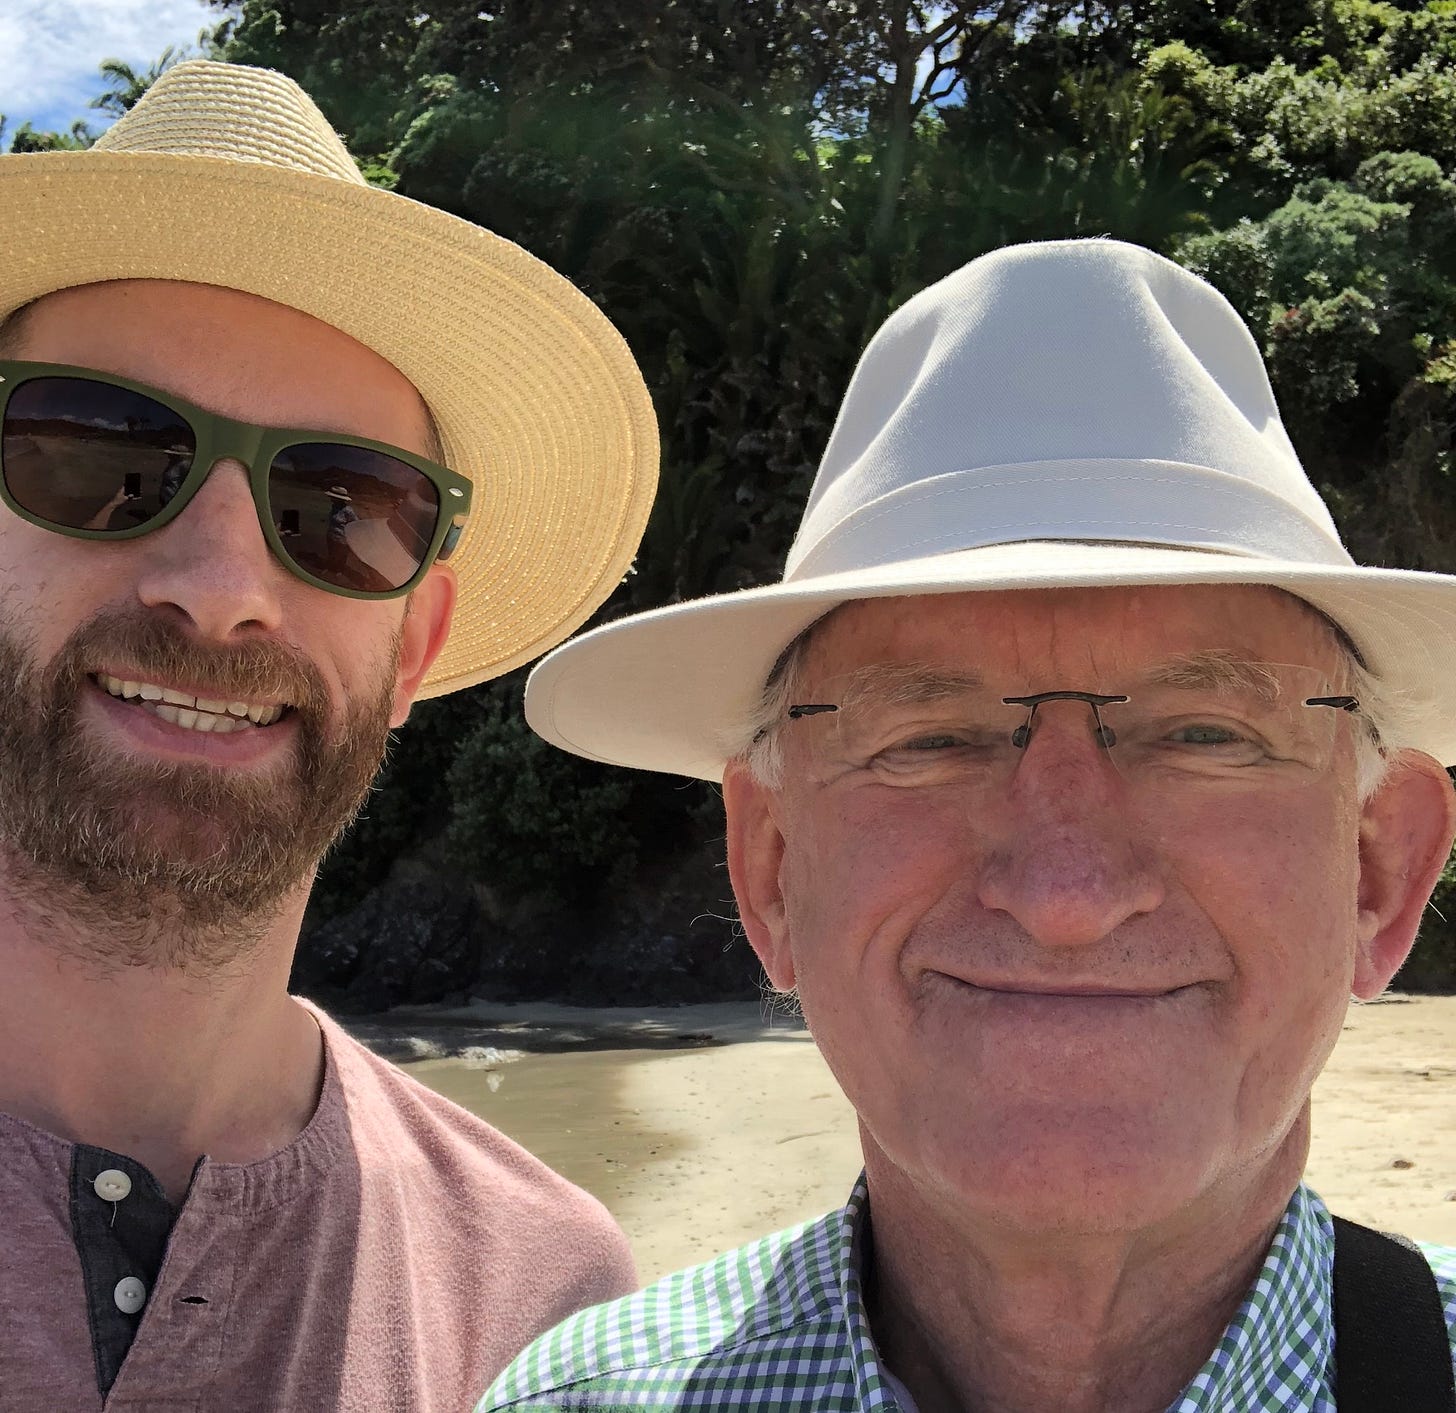 A photo of Hadley and Brian Wickham on a beach in NZ. They're both wearing sun hats and are smiling.